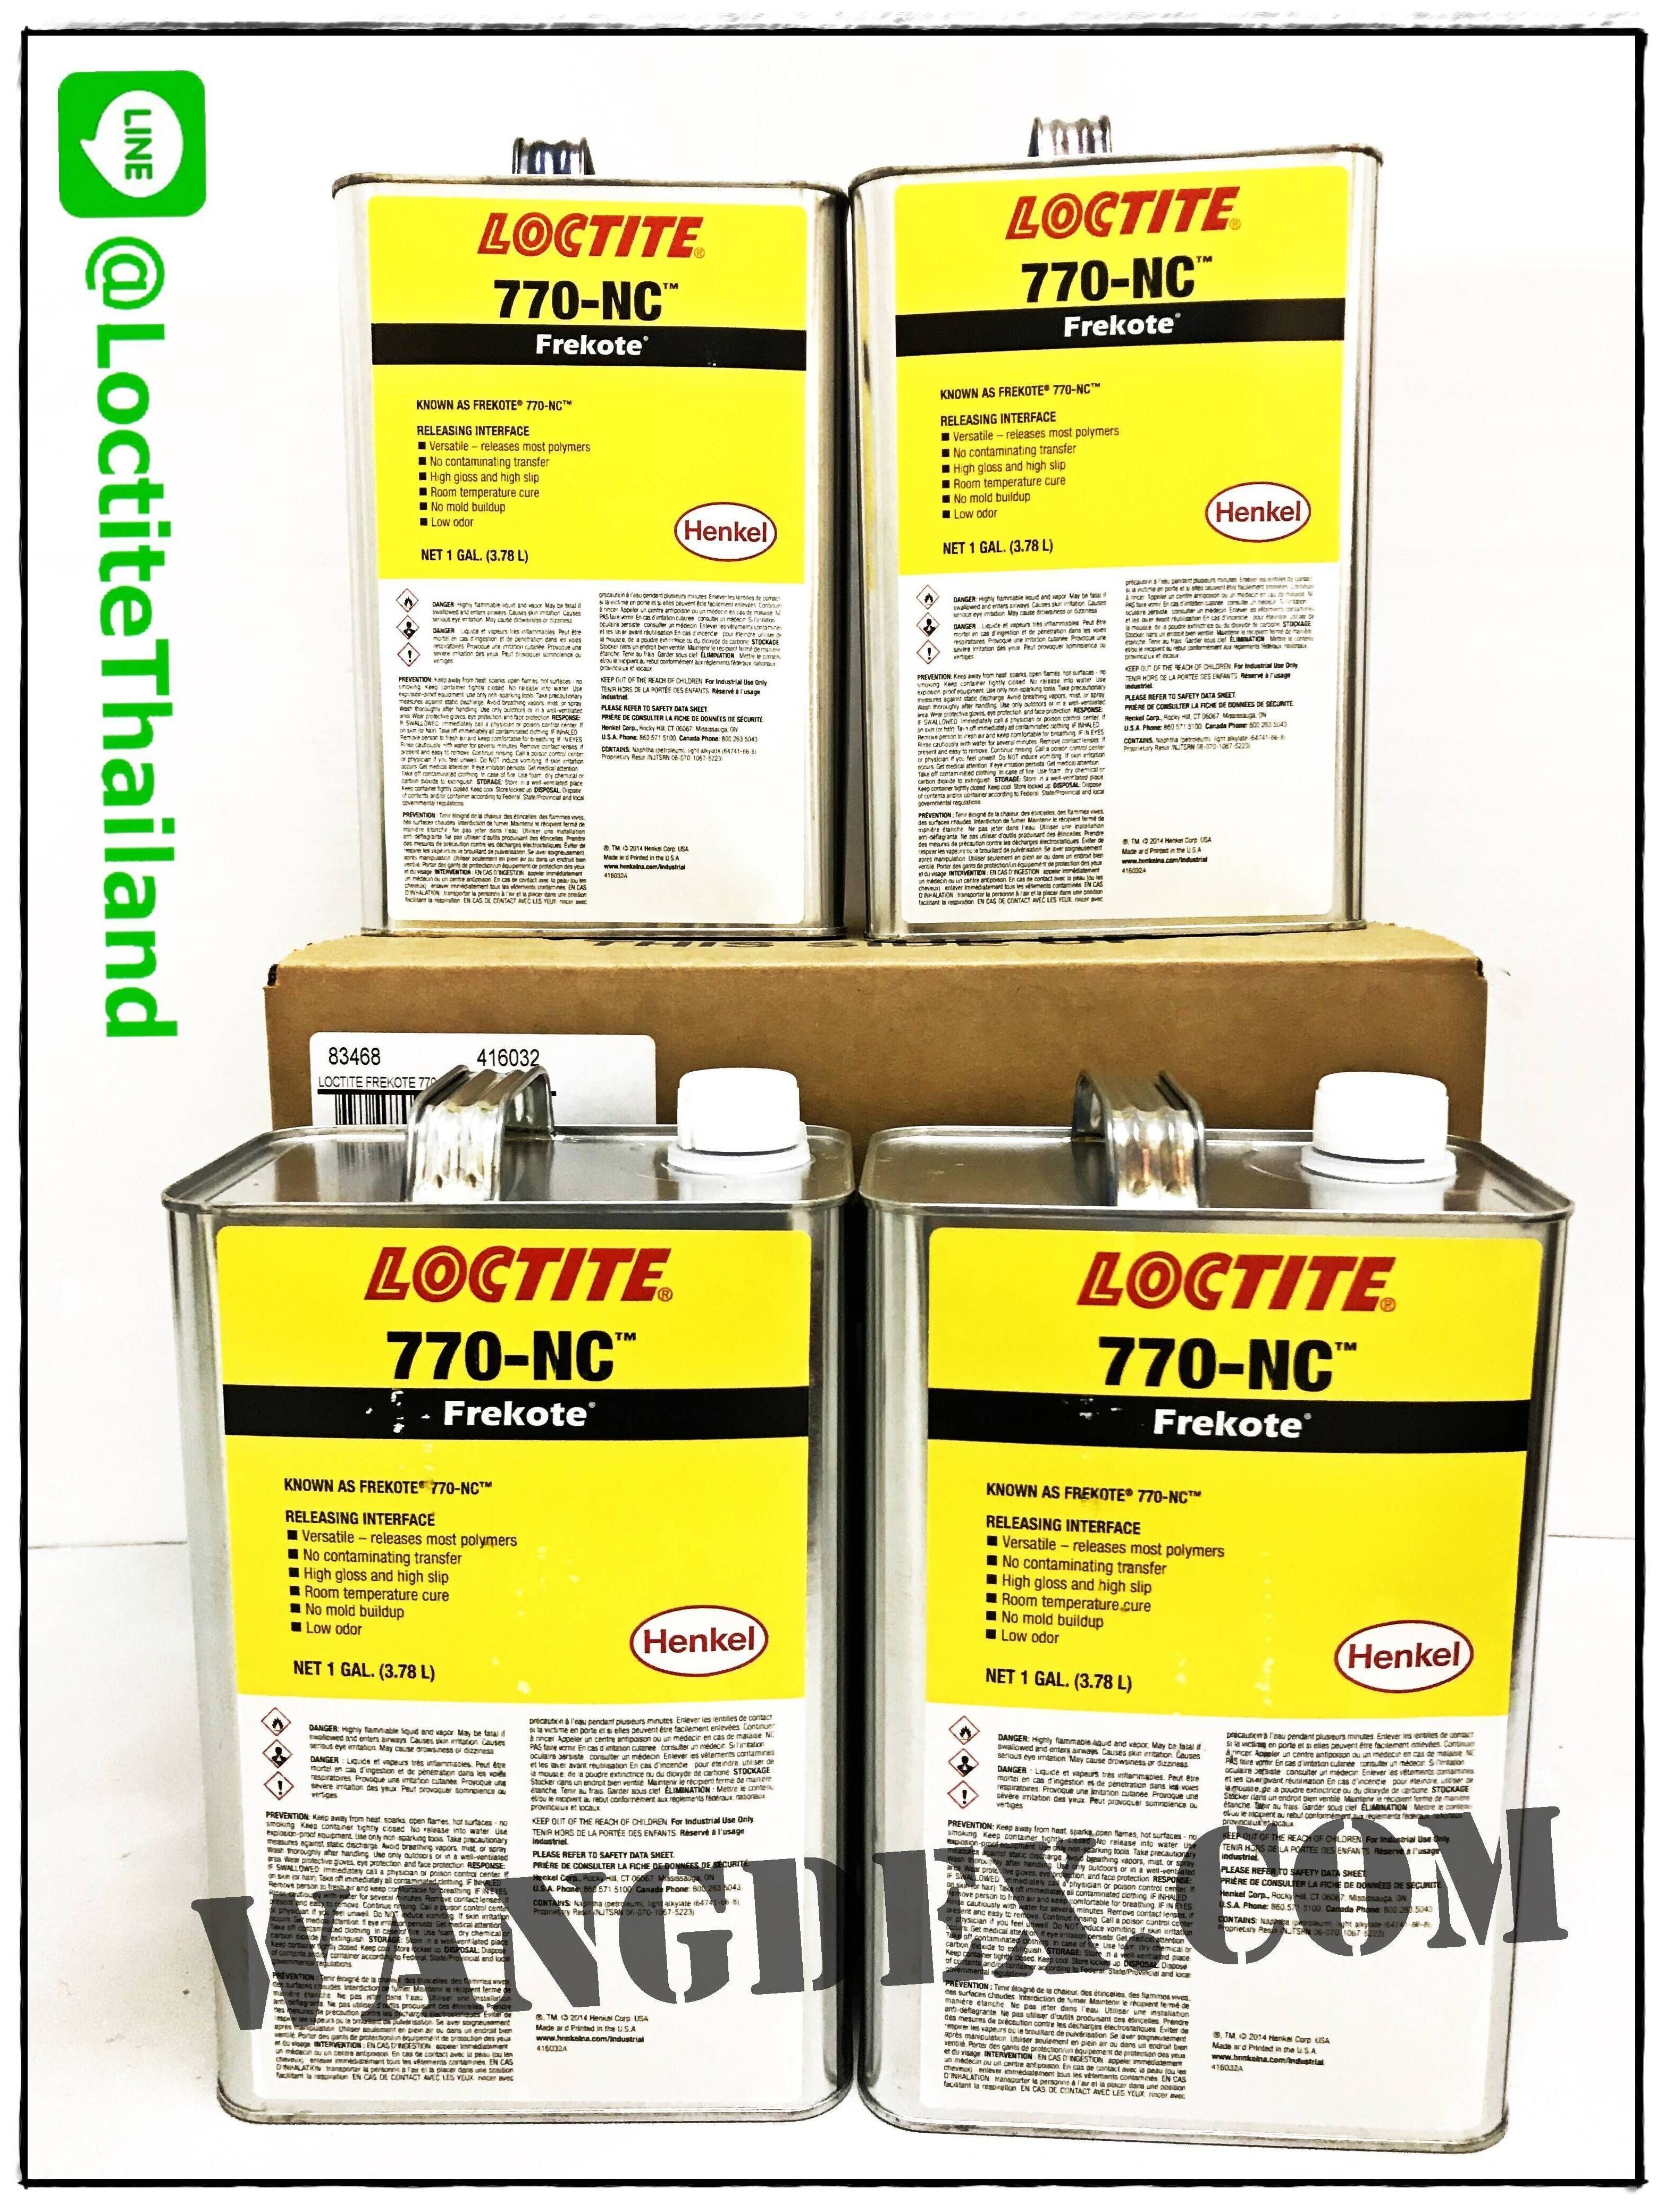 FREKOTE 770-NC
LOCTITE® FREKOTE 770NC is a clear, solvent-based, moisture-cured, epoxy mould release agent for advanced composites and FRP polyester parts. It is a versatile, semi-permanent release ag